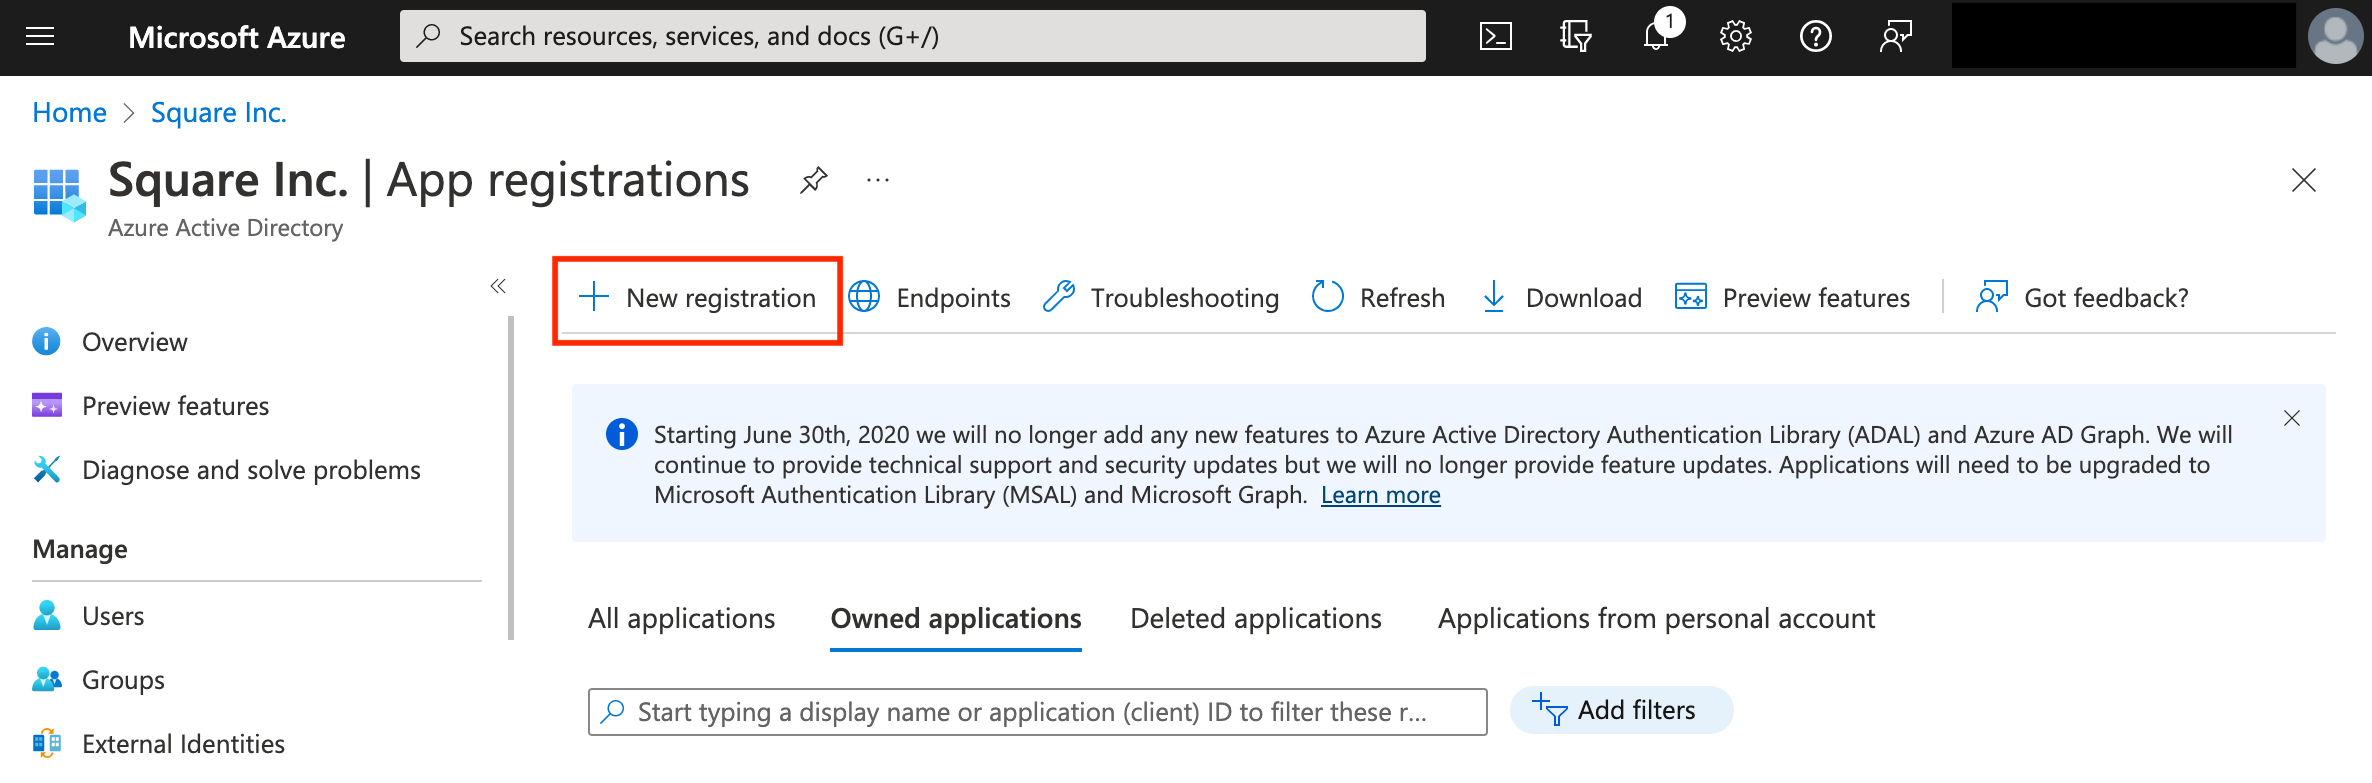 A graphic showing the Microsoft Azure App registrations page with the "New registration" button emphasized.